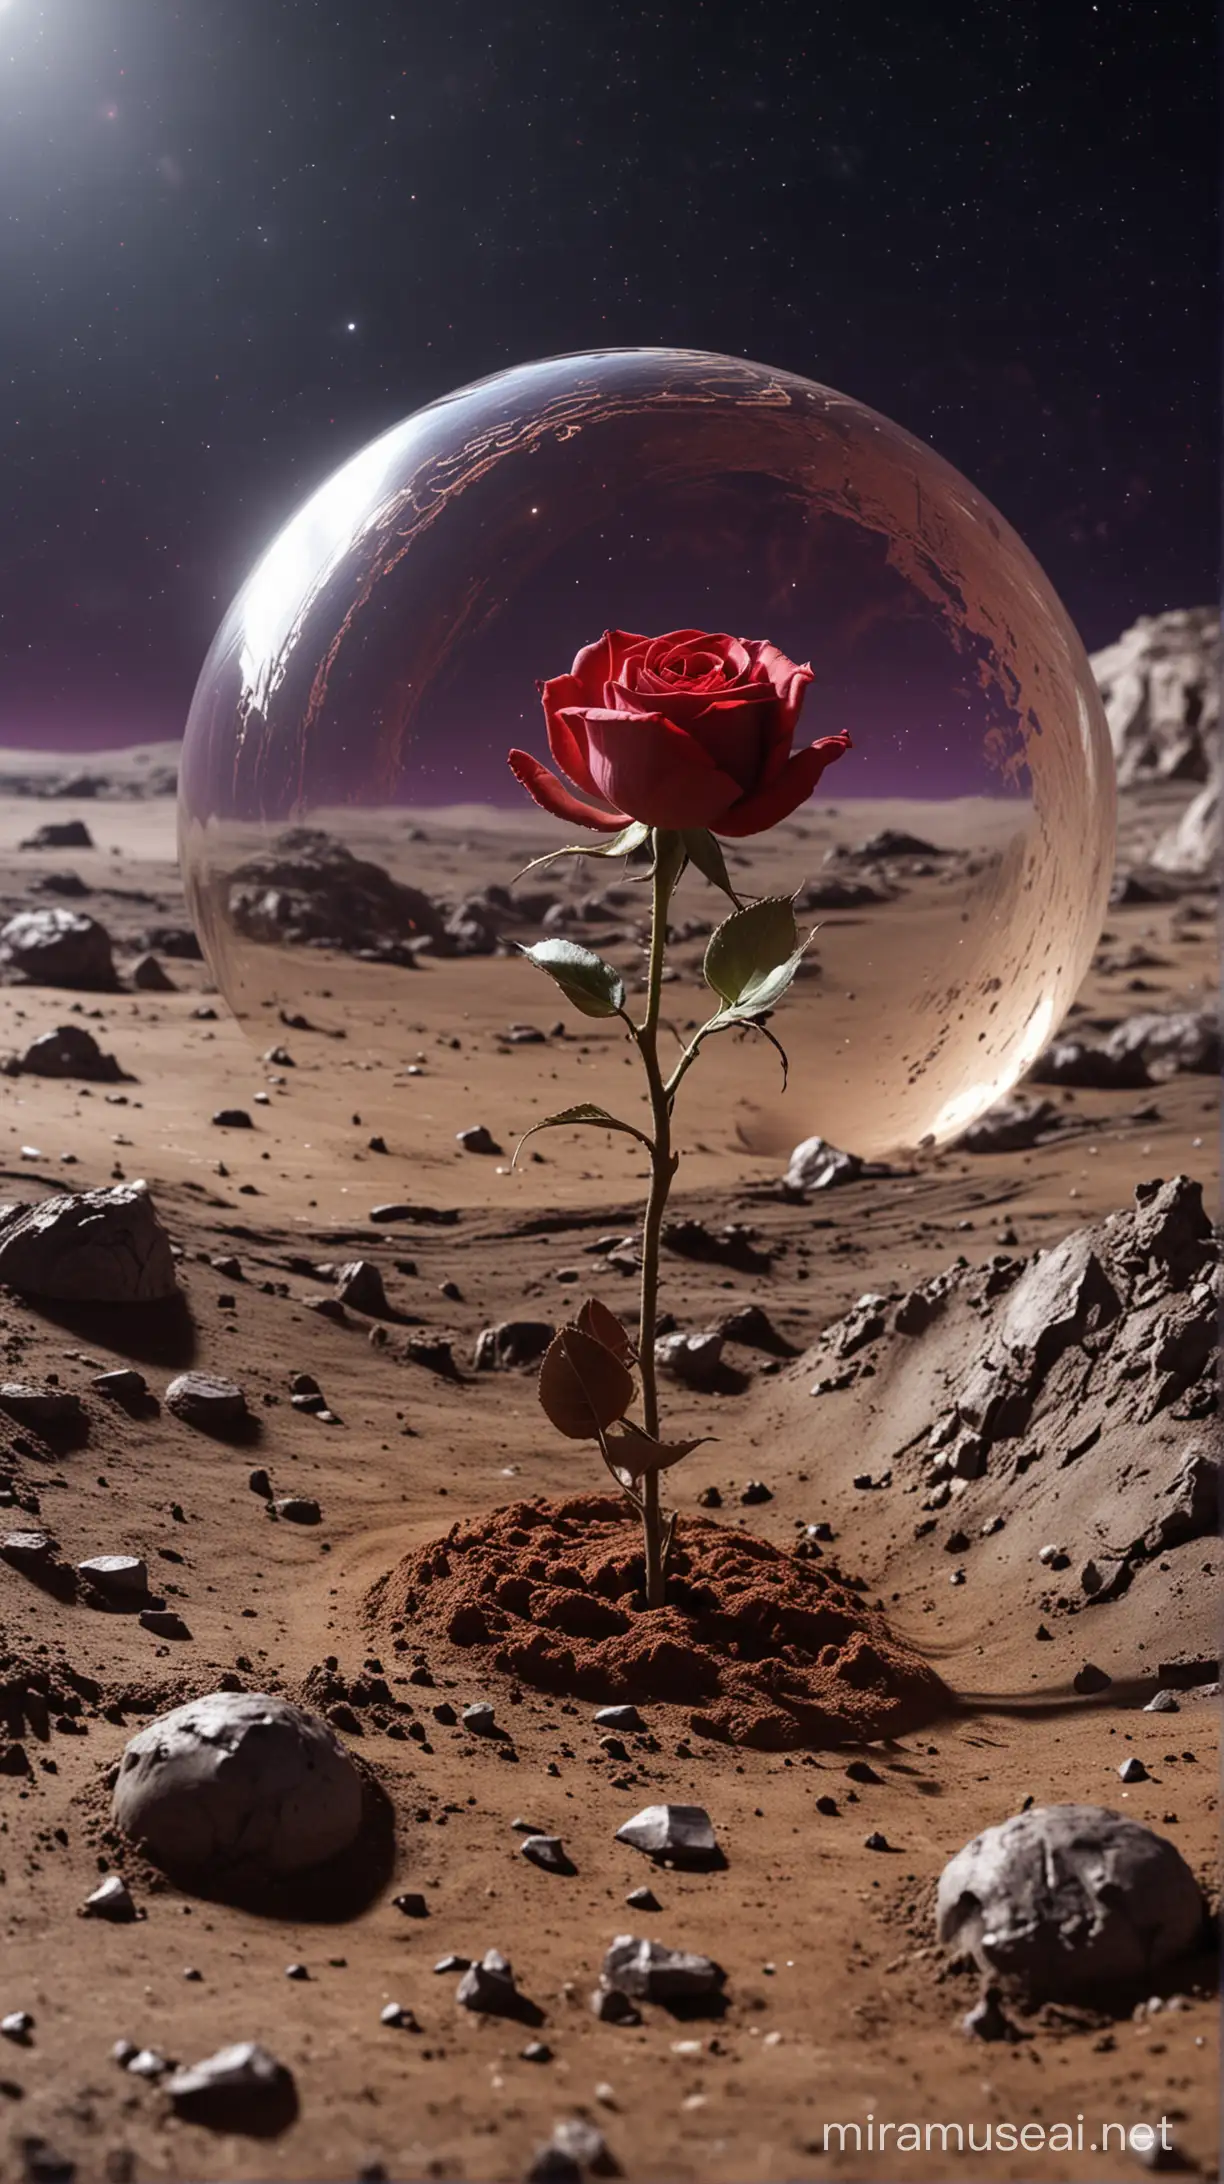 Cracked Glass Dome on Moonlike Planet with Red Rose in Space